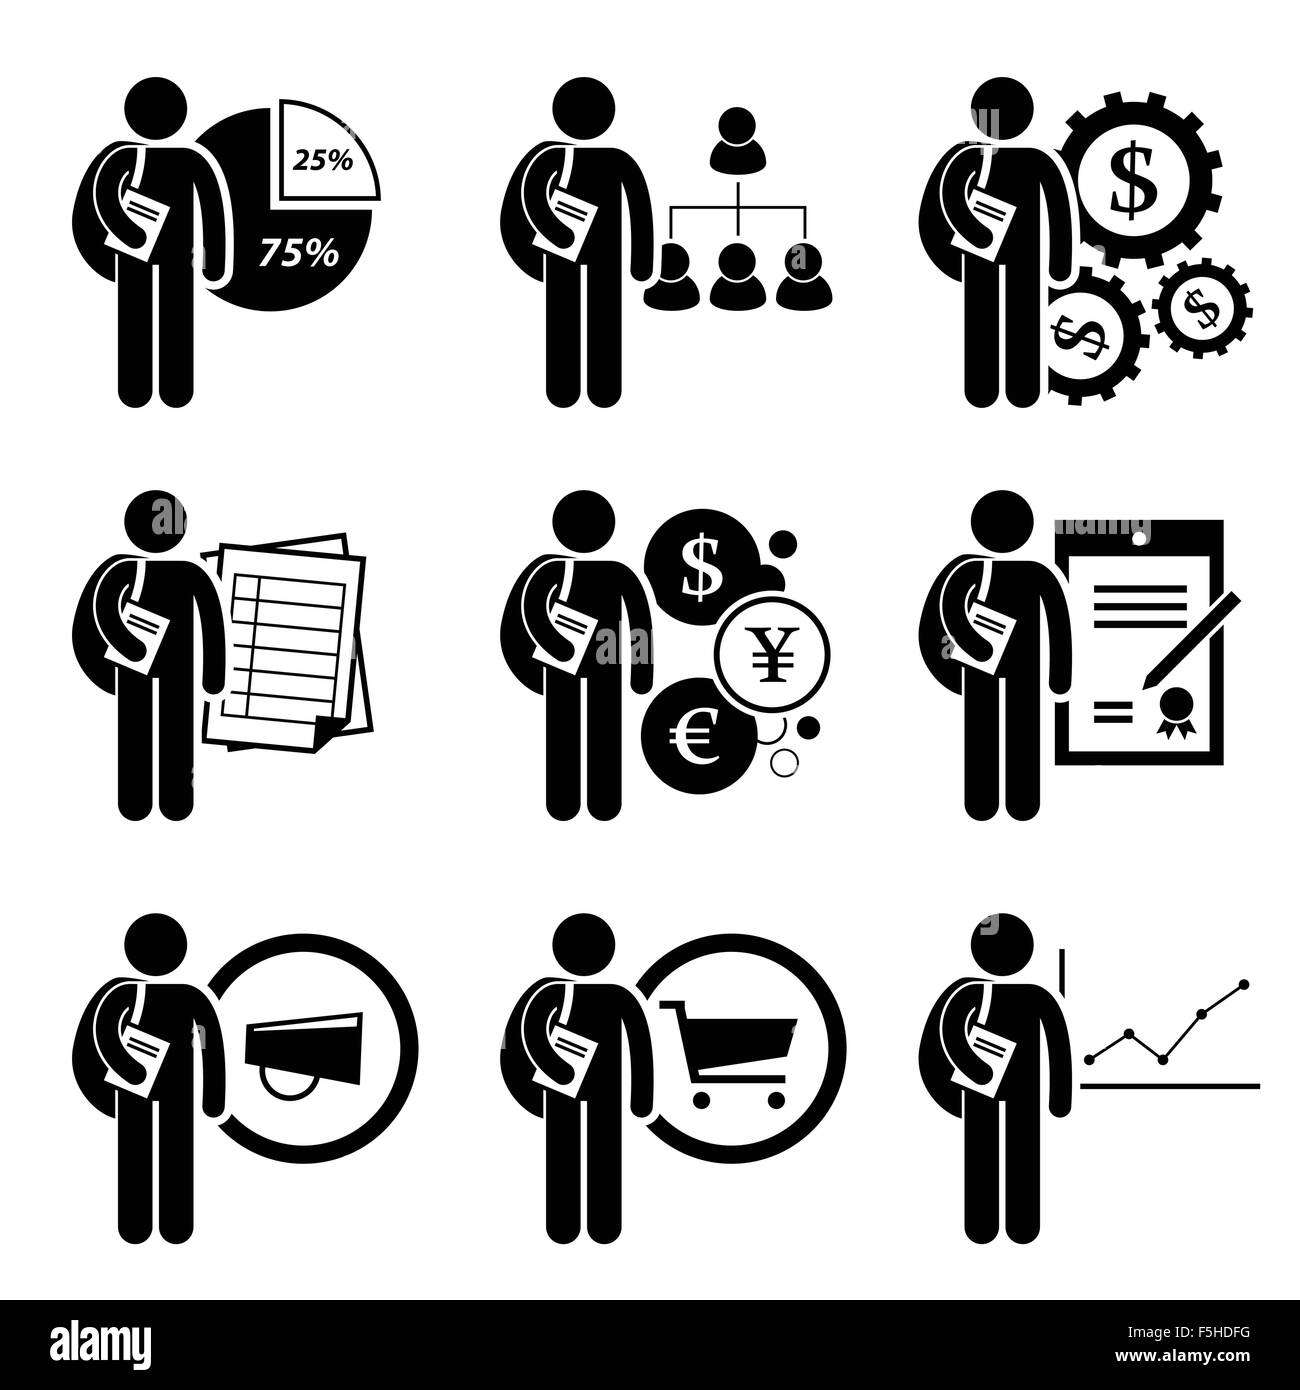 Student Degree in Business Management - Analysis, Human Resources, Financial Engineering, Accounting, Currency, Law, Marketing, Stock Vector